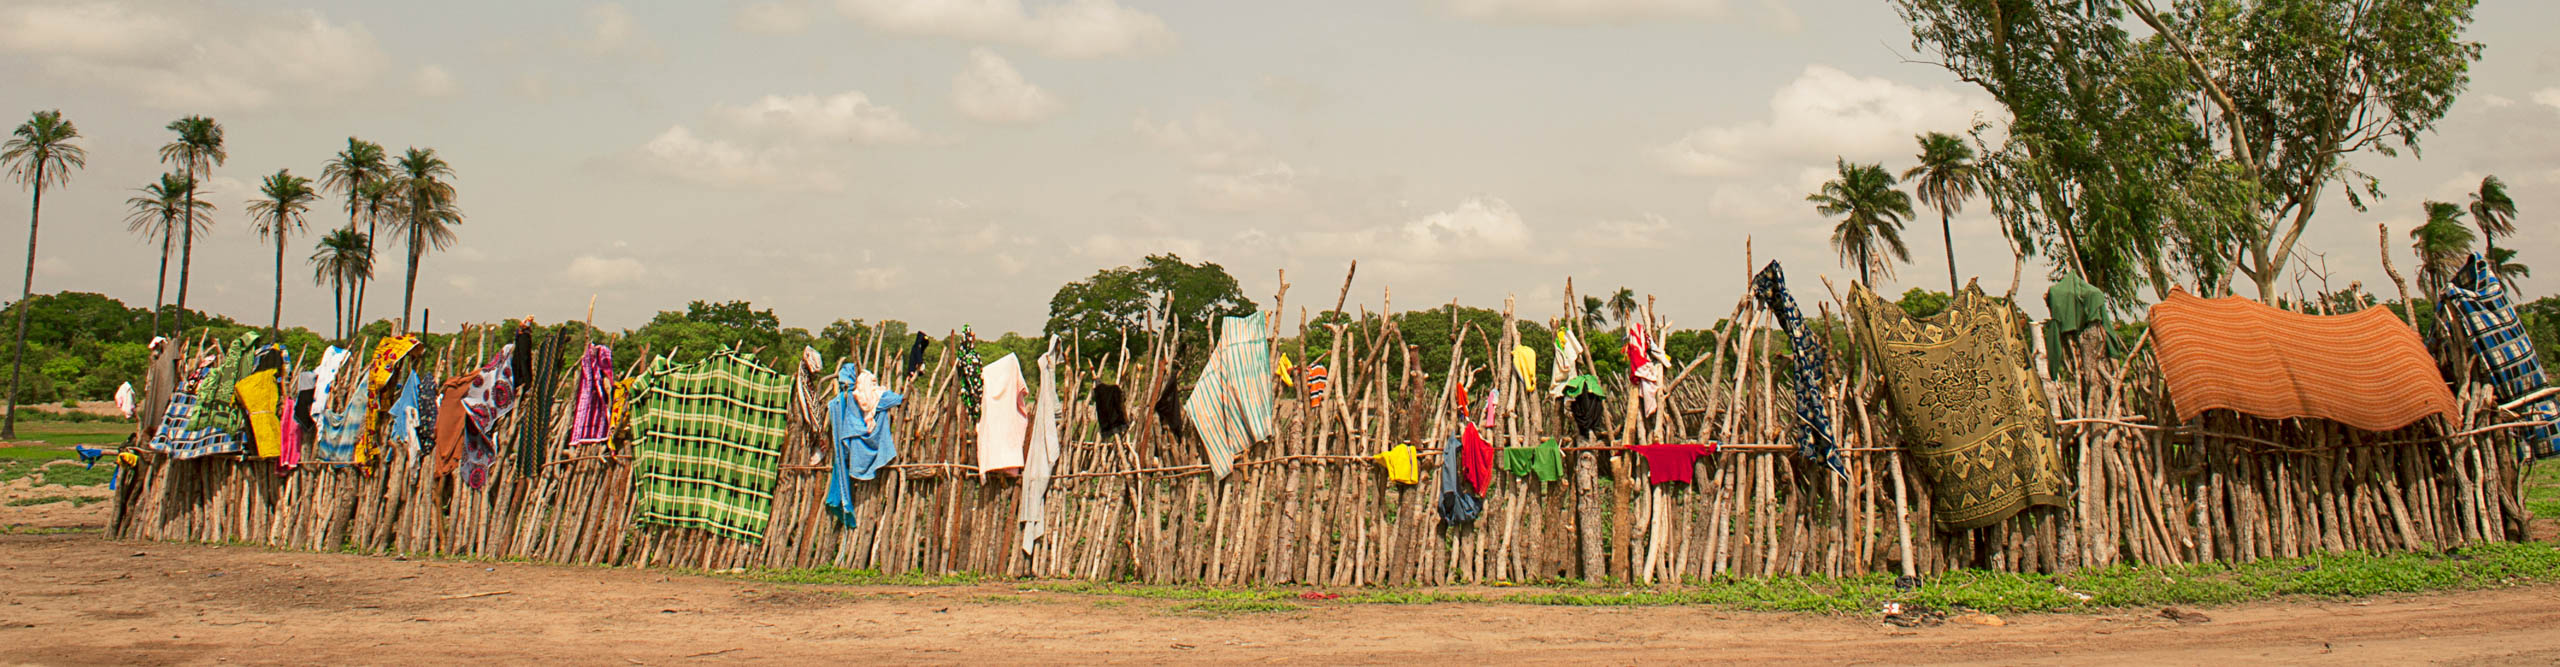 Colorful clothes hang on a wooden sticks, drying in the sun, in southern Burkina Faso.